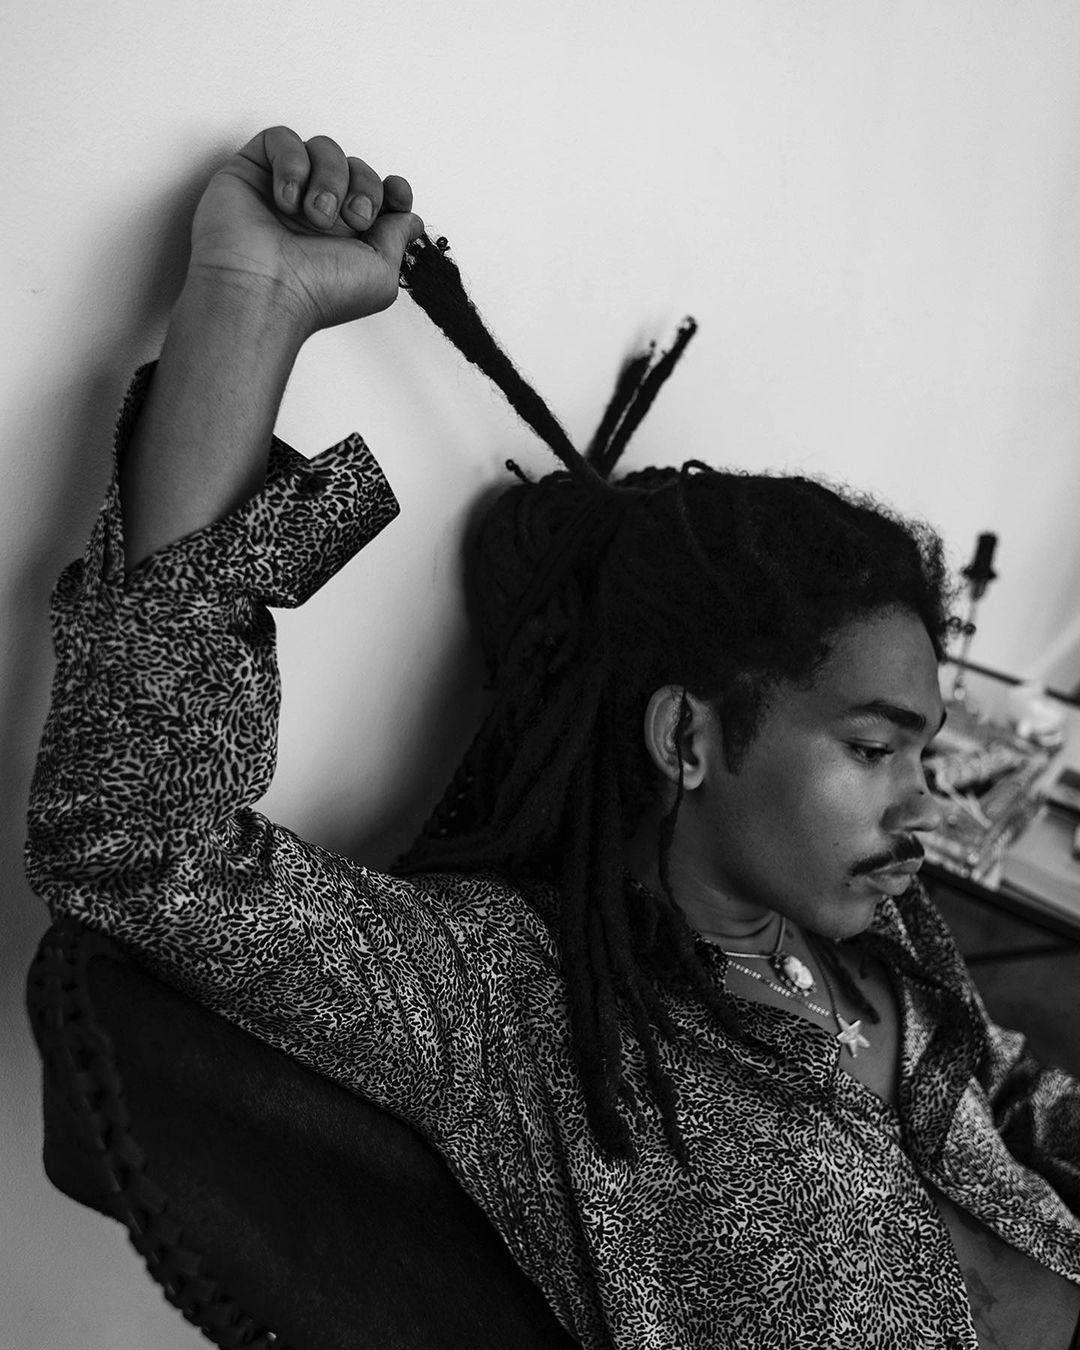 SPOTTED: Luka Sabbat for Boys By Girls